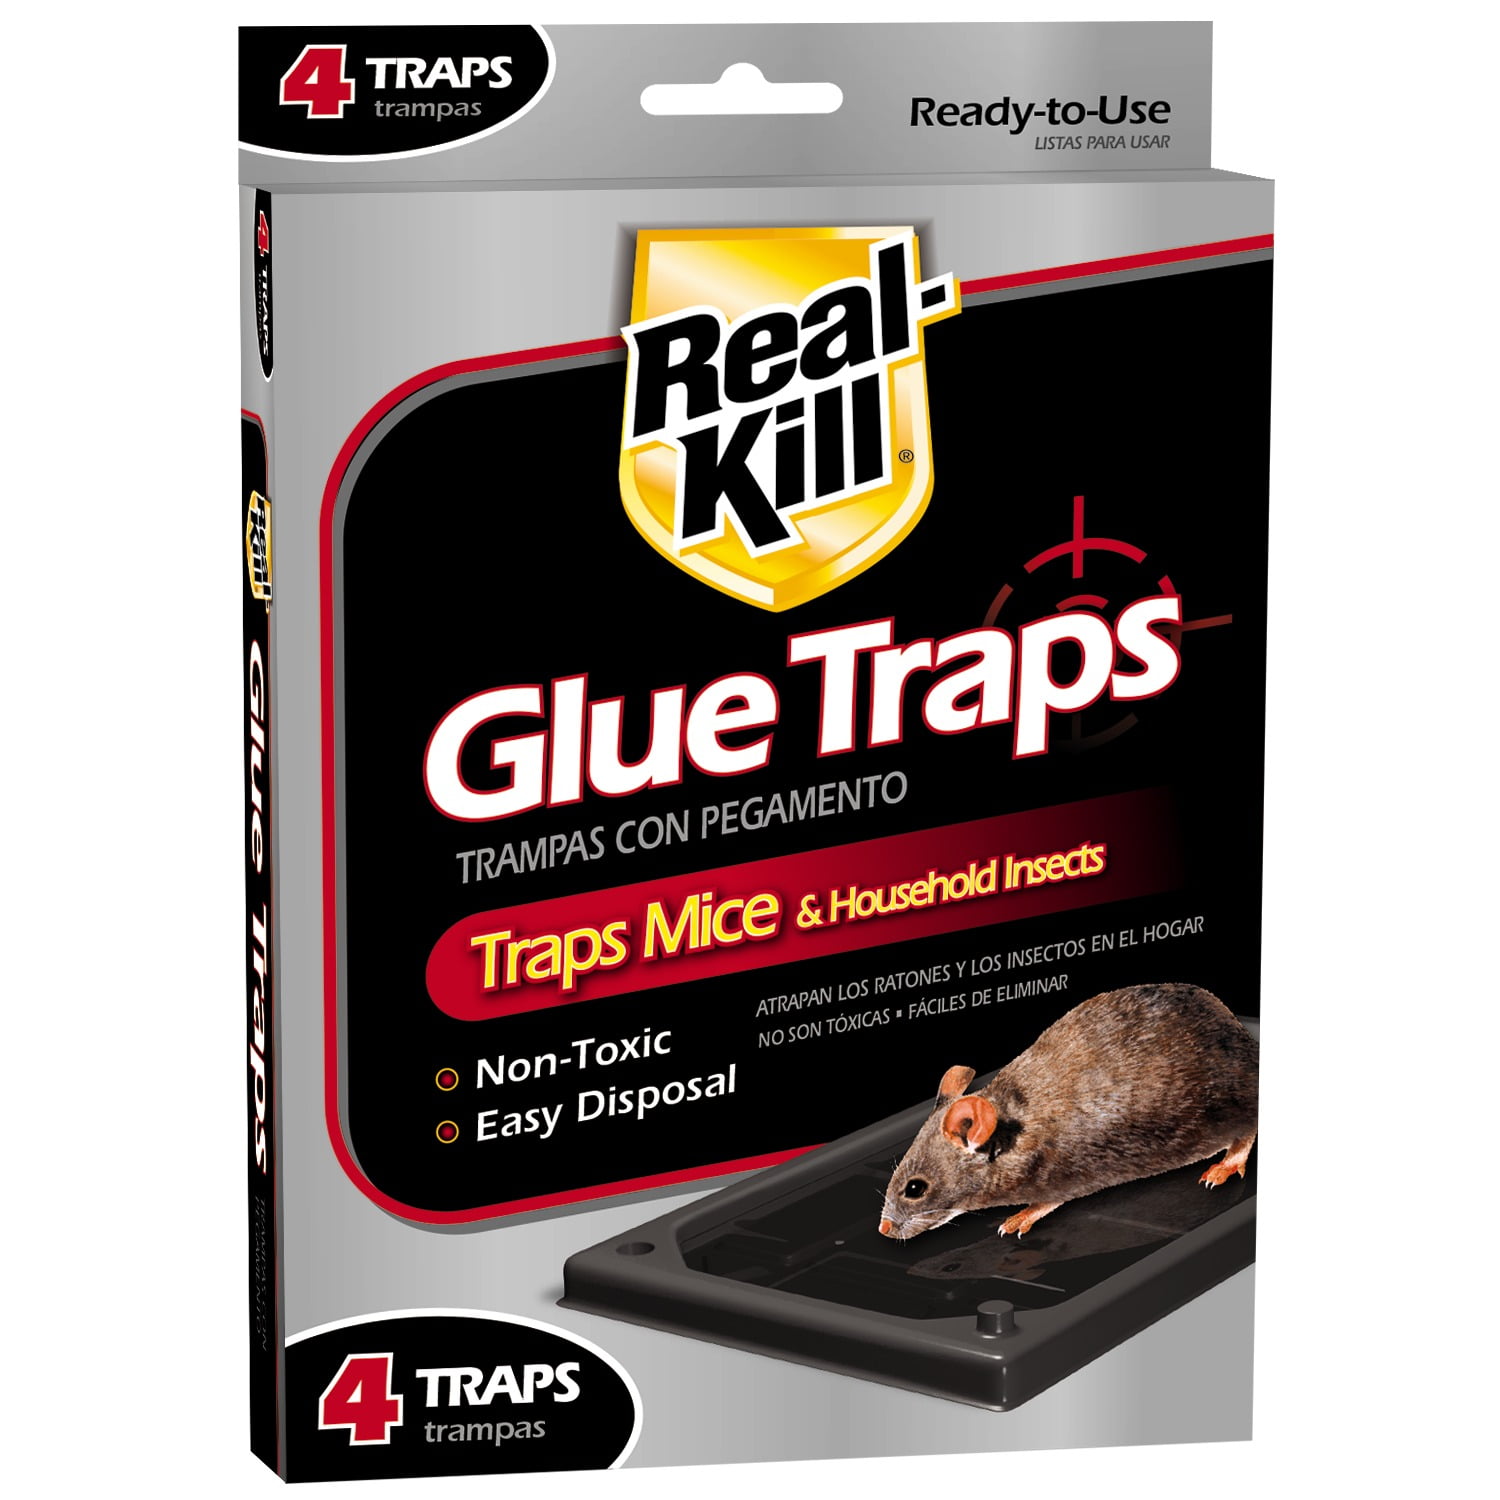 Qualirey 12 Pack Mouse and Insect Glue Traps, Strong Sticky Mice Traps  Indoor for Home, Pre Scented Rodent Traps with Non Toxic Glue for House  Garage